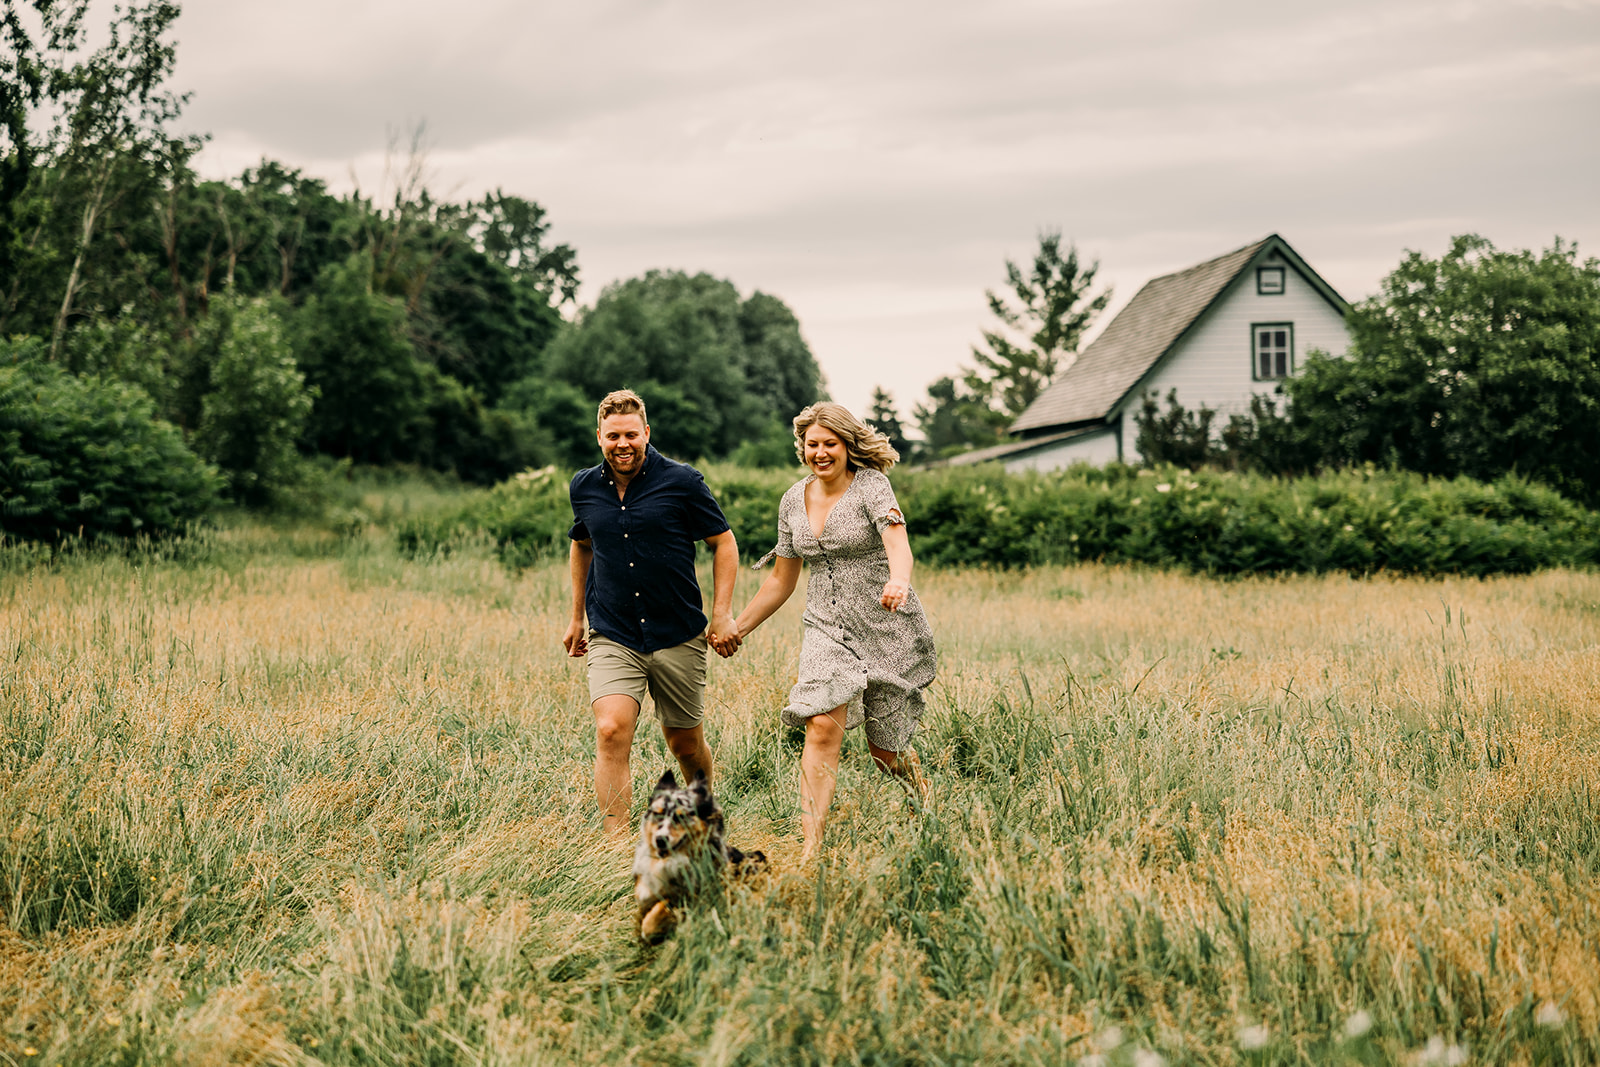 Romantic engagement photoshoot in a scenic field